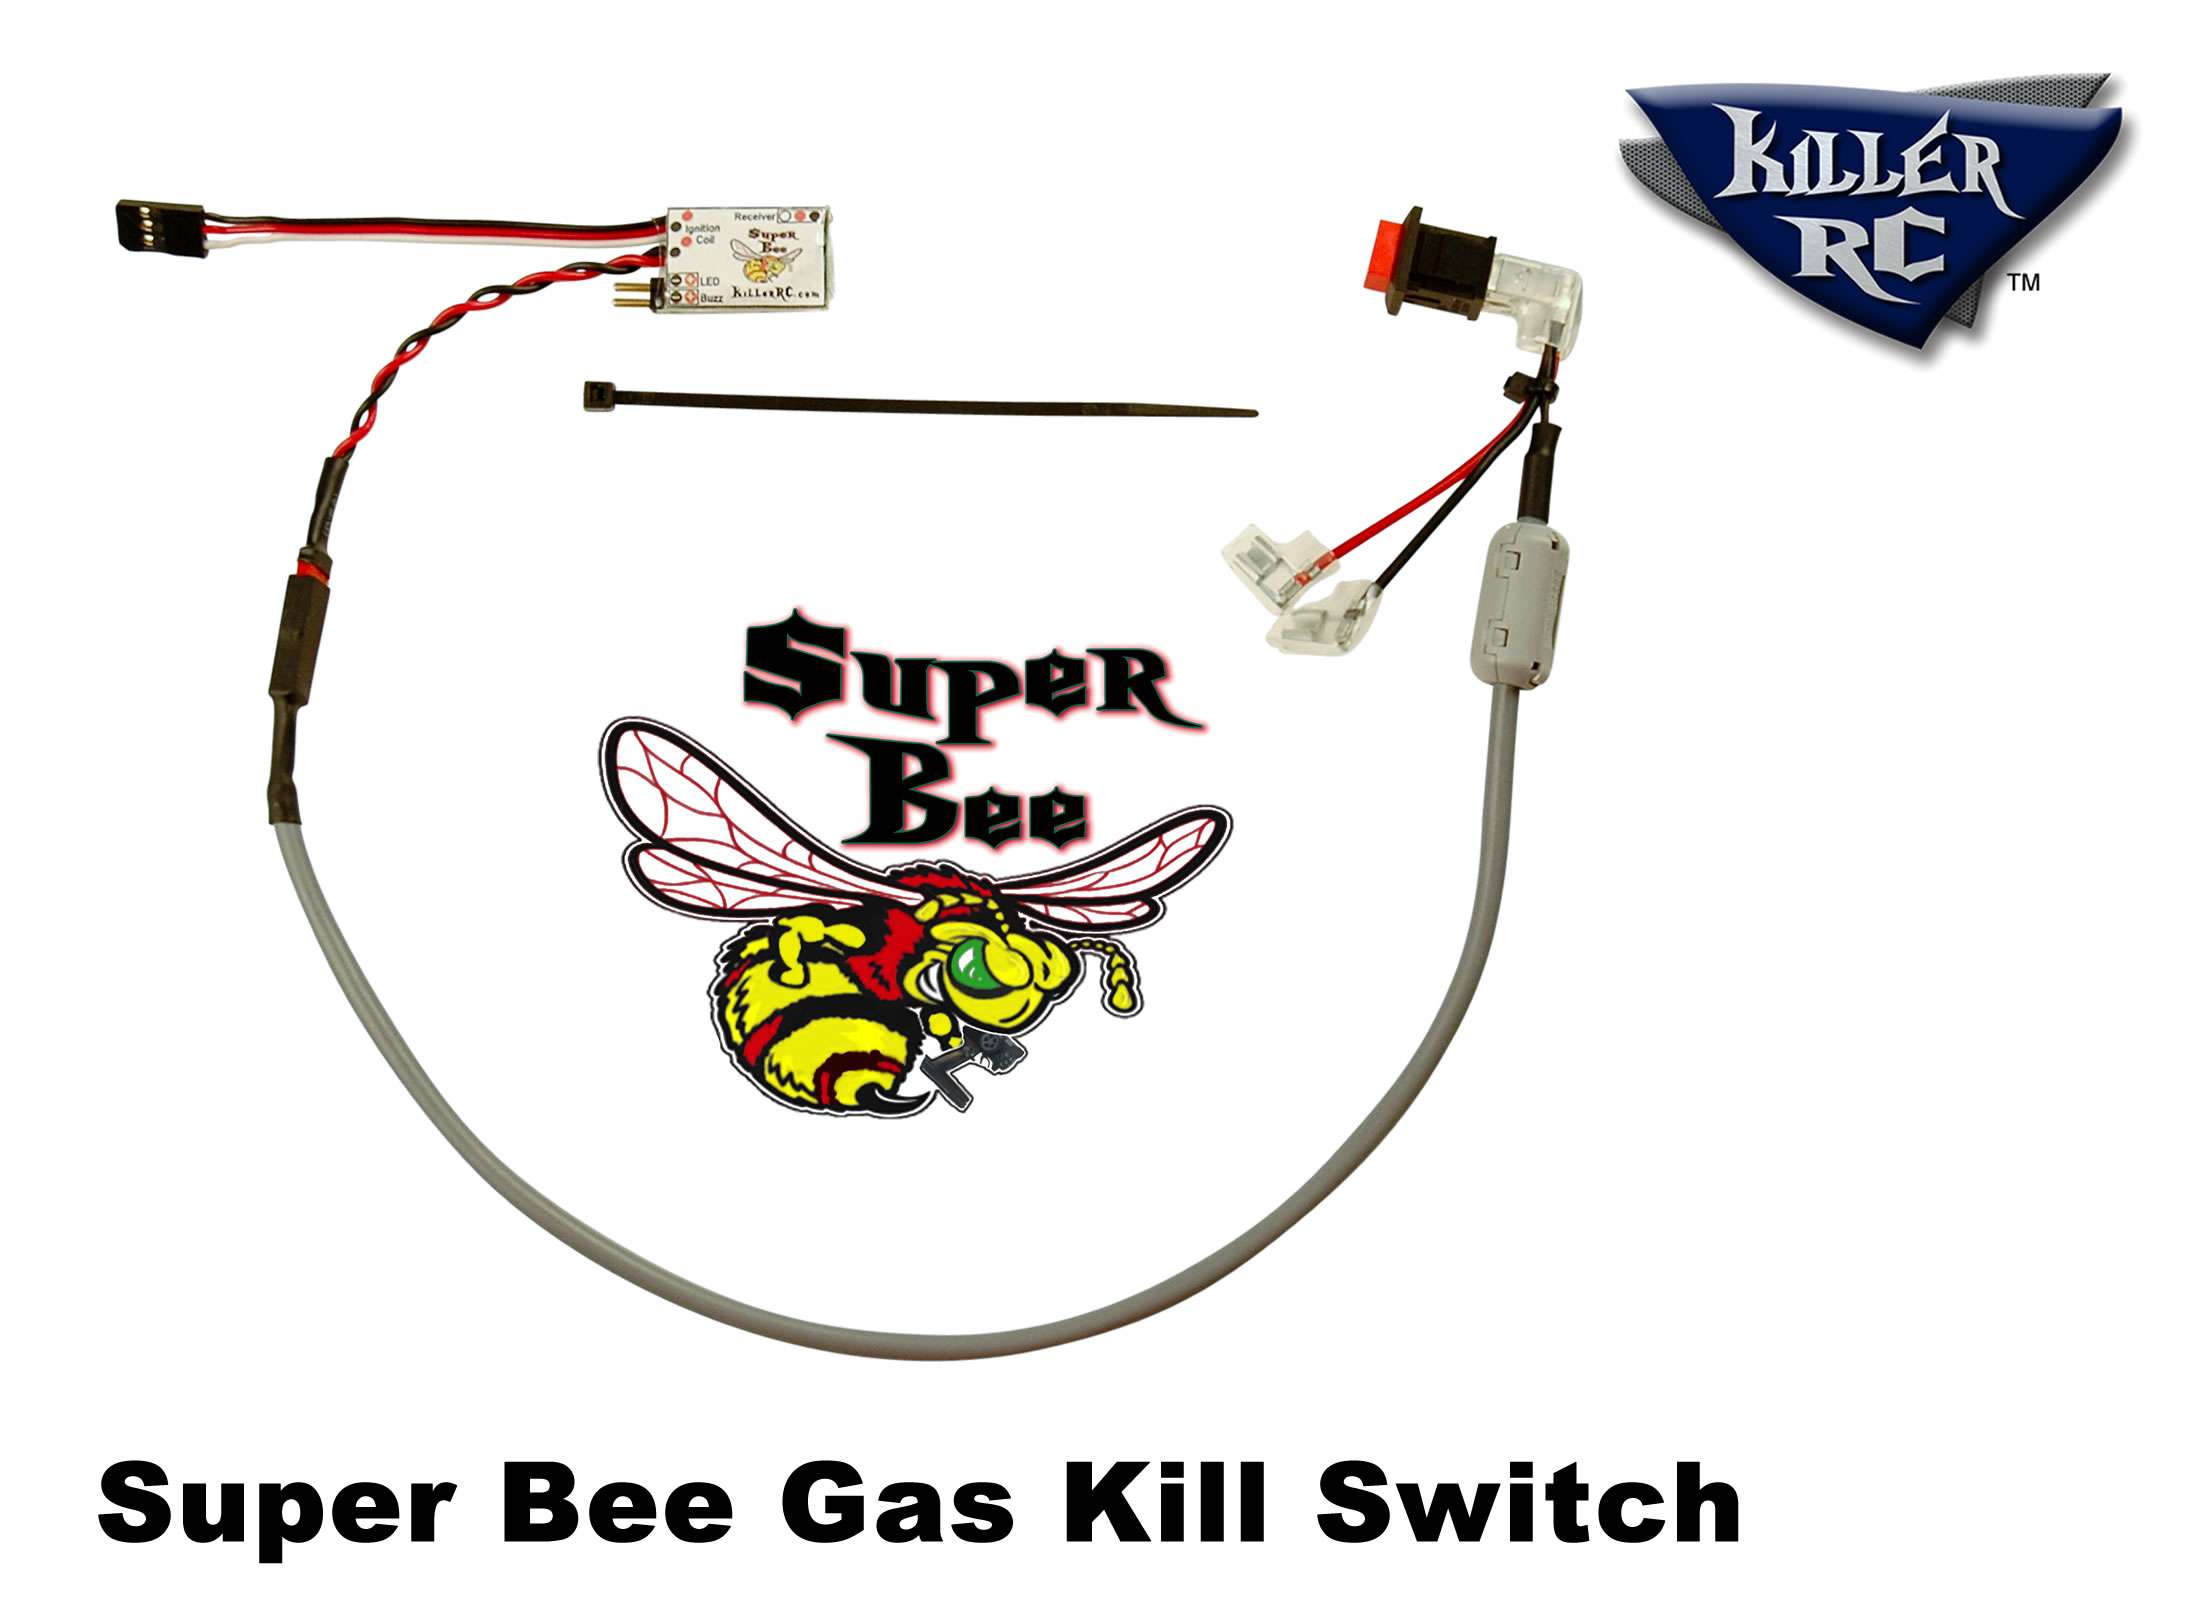 Super Bee engine kill switch  Intlwaters - RC Boating Forum